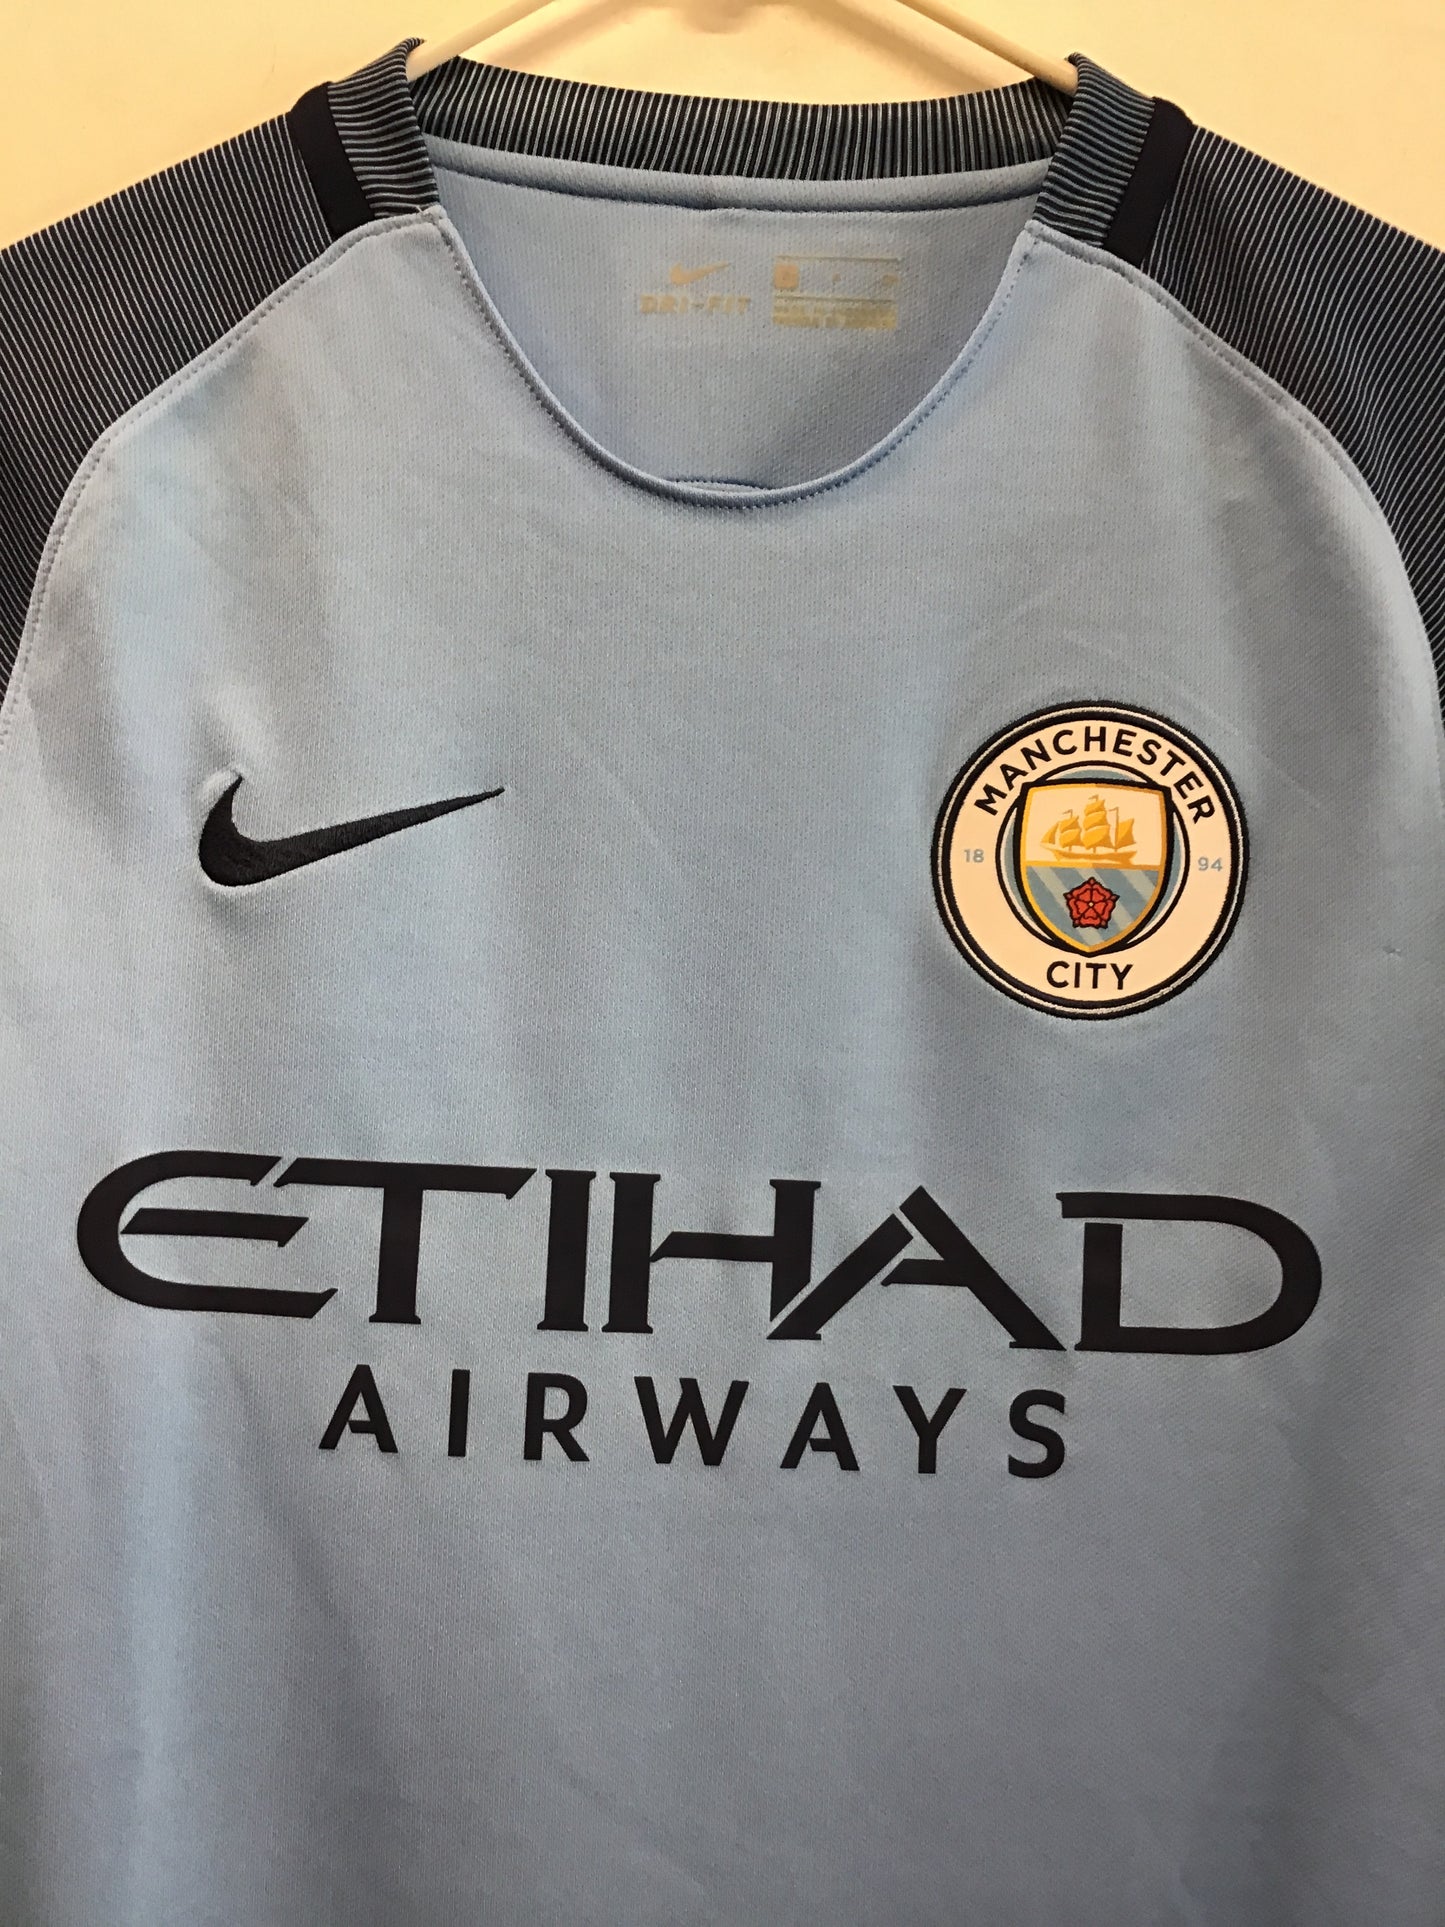 Manchester City Authentic Nike 2016 Jersey, Size S